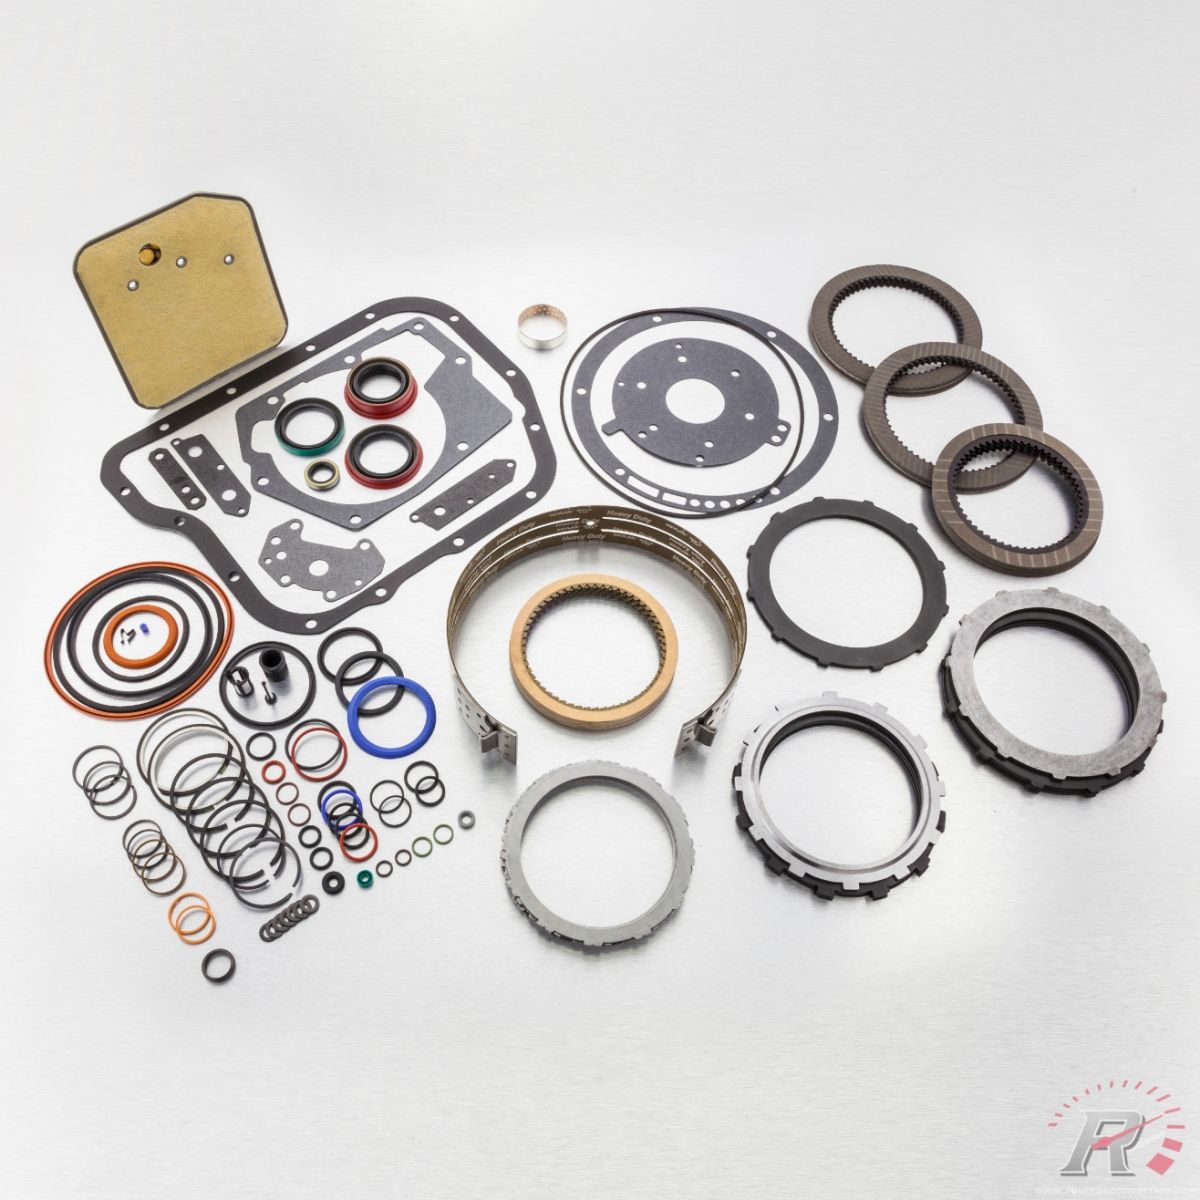 Revmax - RevMax High Performance Rebuild Kit GPZ Clutches For 03-07 Dodge Ram 5.9L Cummins With 48RE Transmission